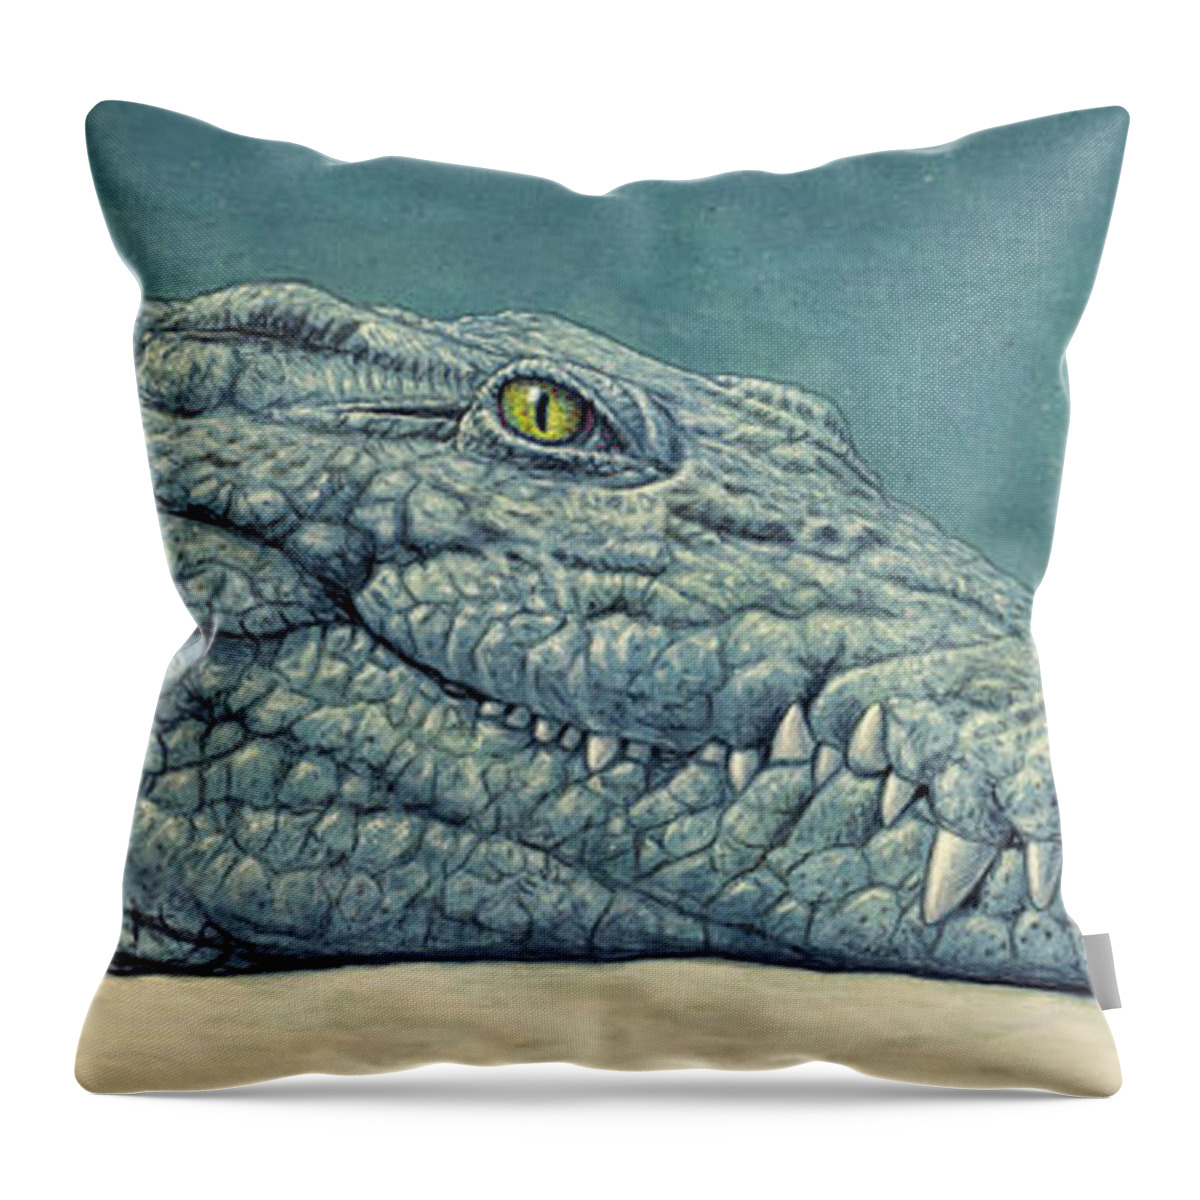 Crocodile Throw Pillow featuring the painting Mockin' a Croc by James W Johnson